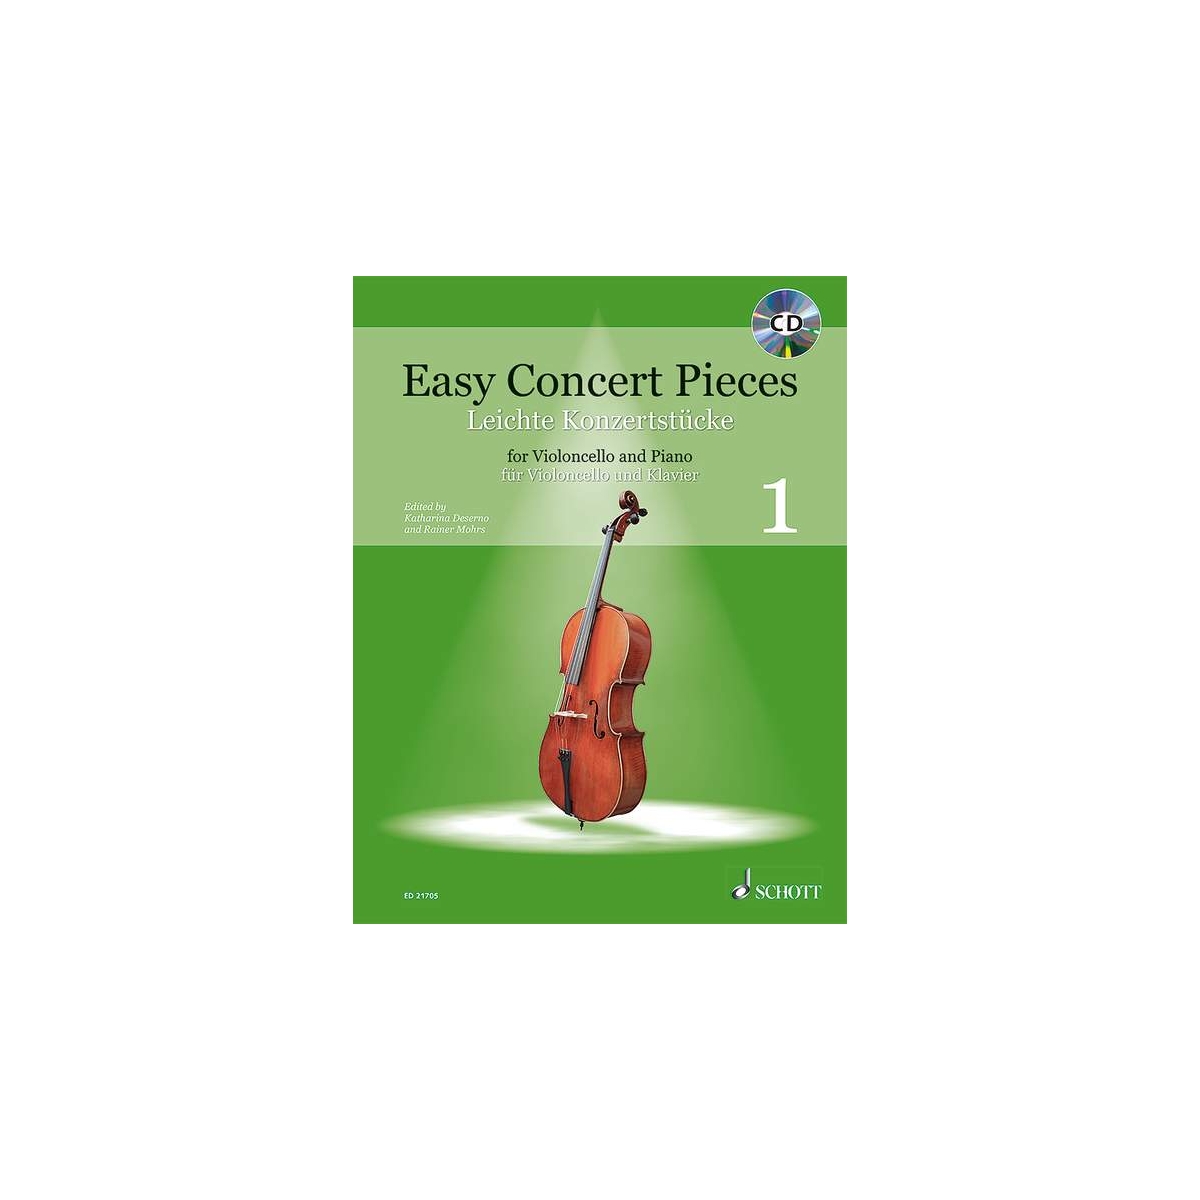 Easy Concert Pieces for Cello and Piano